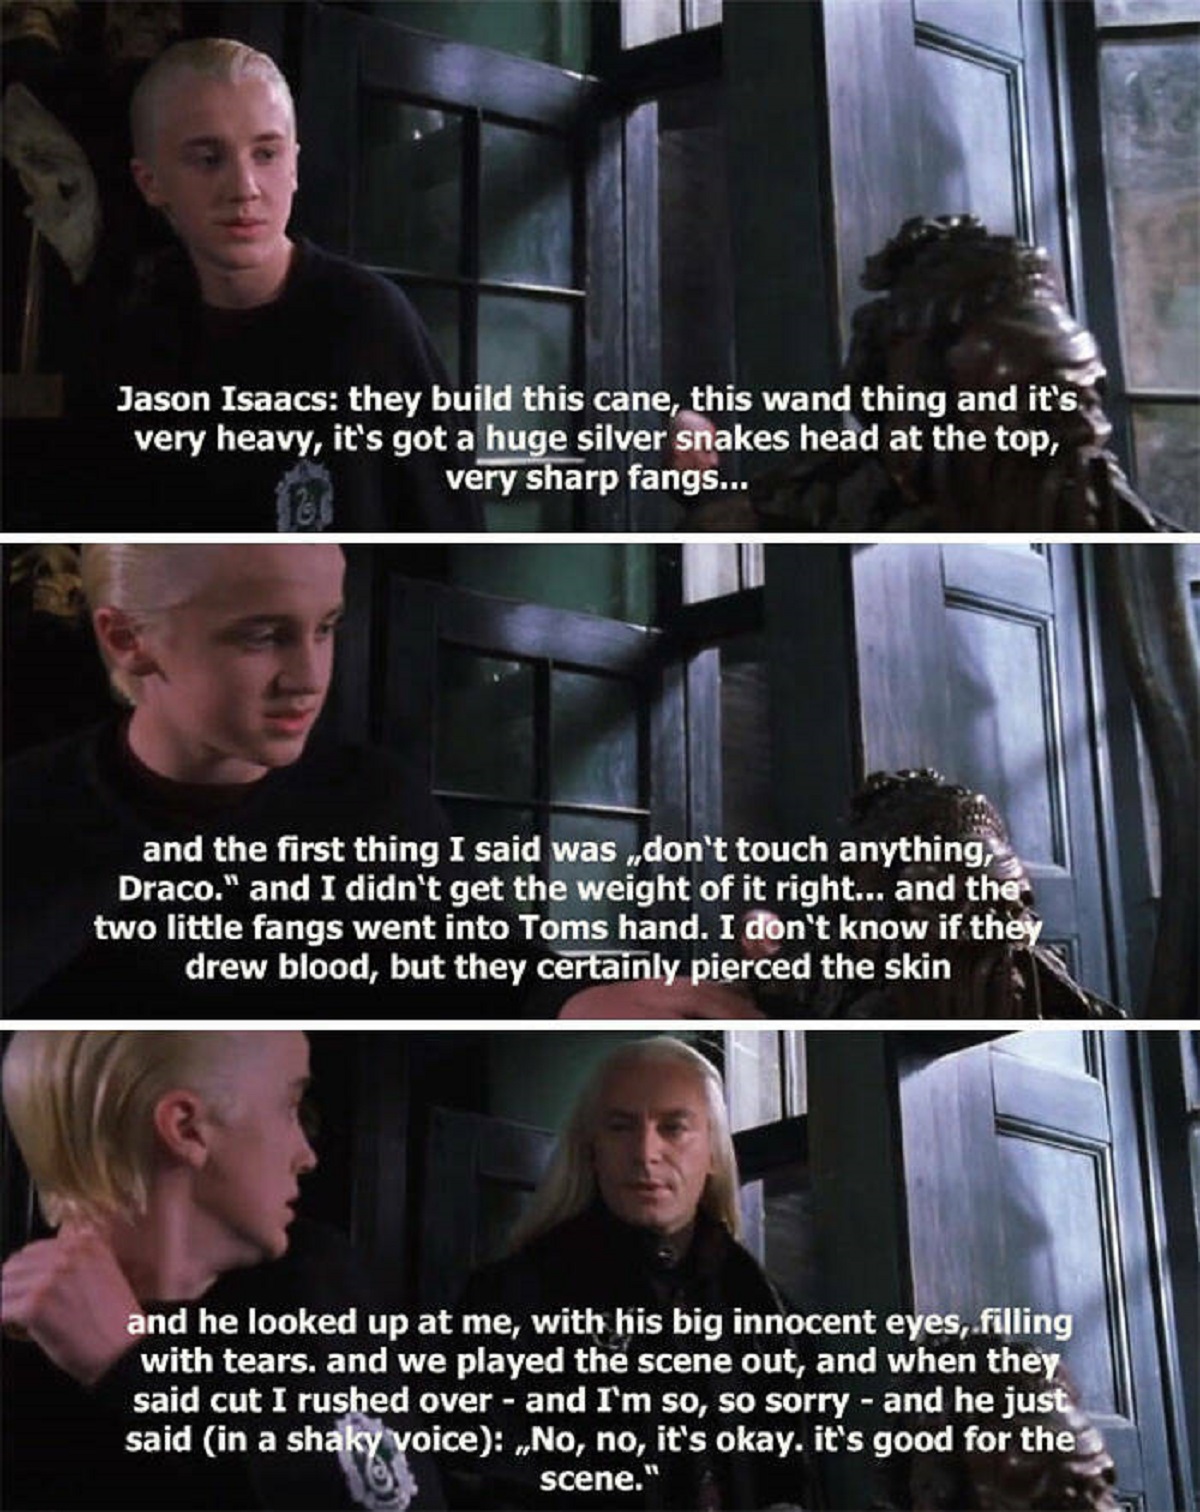 photo caption - Jason Isaacs they build this cane, this wand thing and it's very heavy, it's got a huge silver snakes head at the top, very sharp fangs... and the first thing I said was,don't touch anything, Draco." and I didn't get the weight of it right